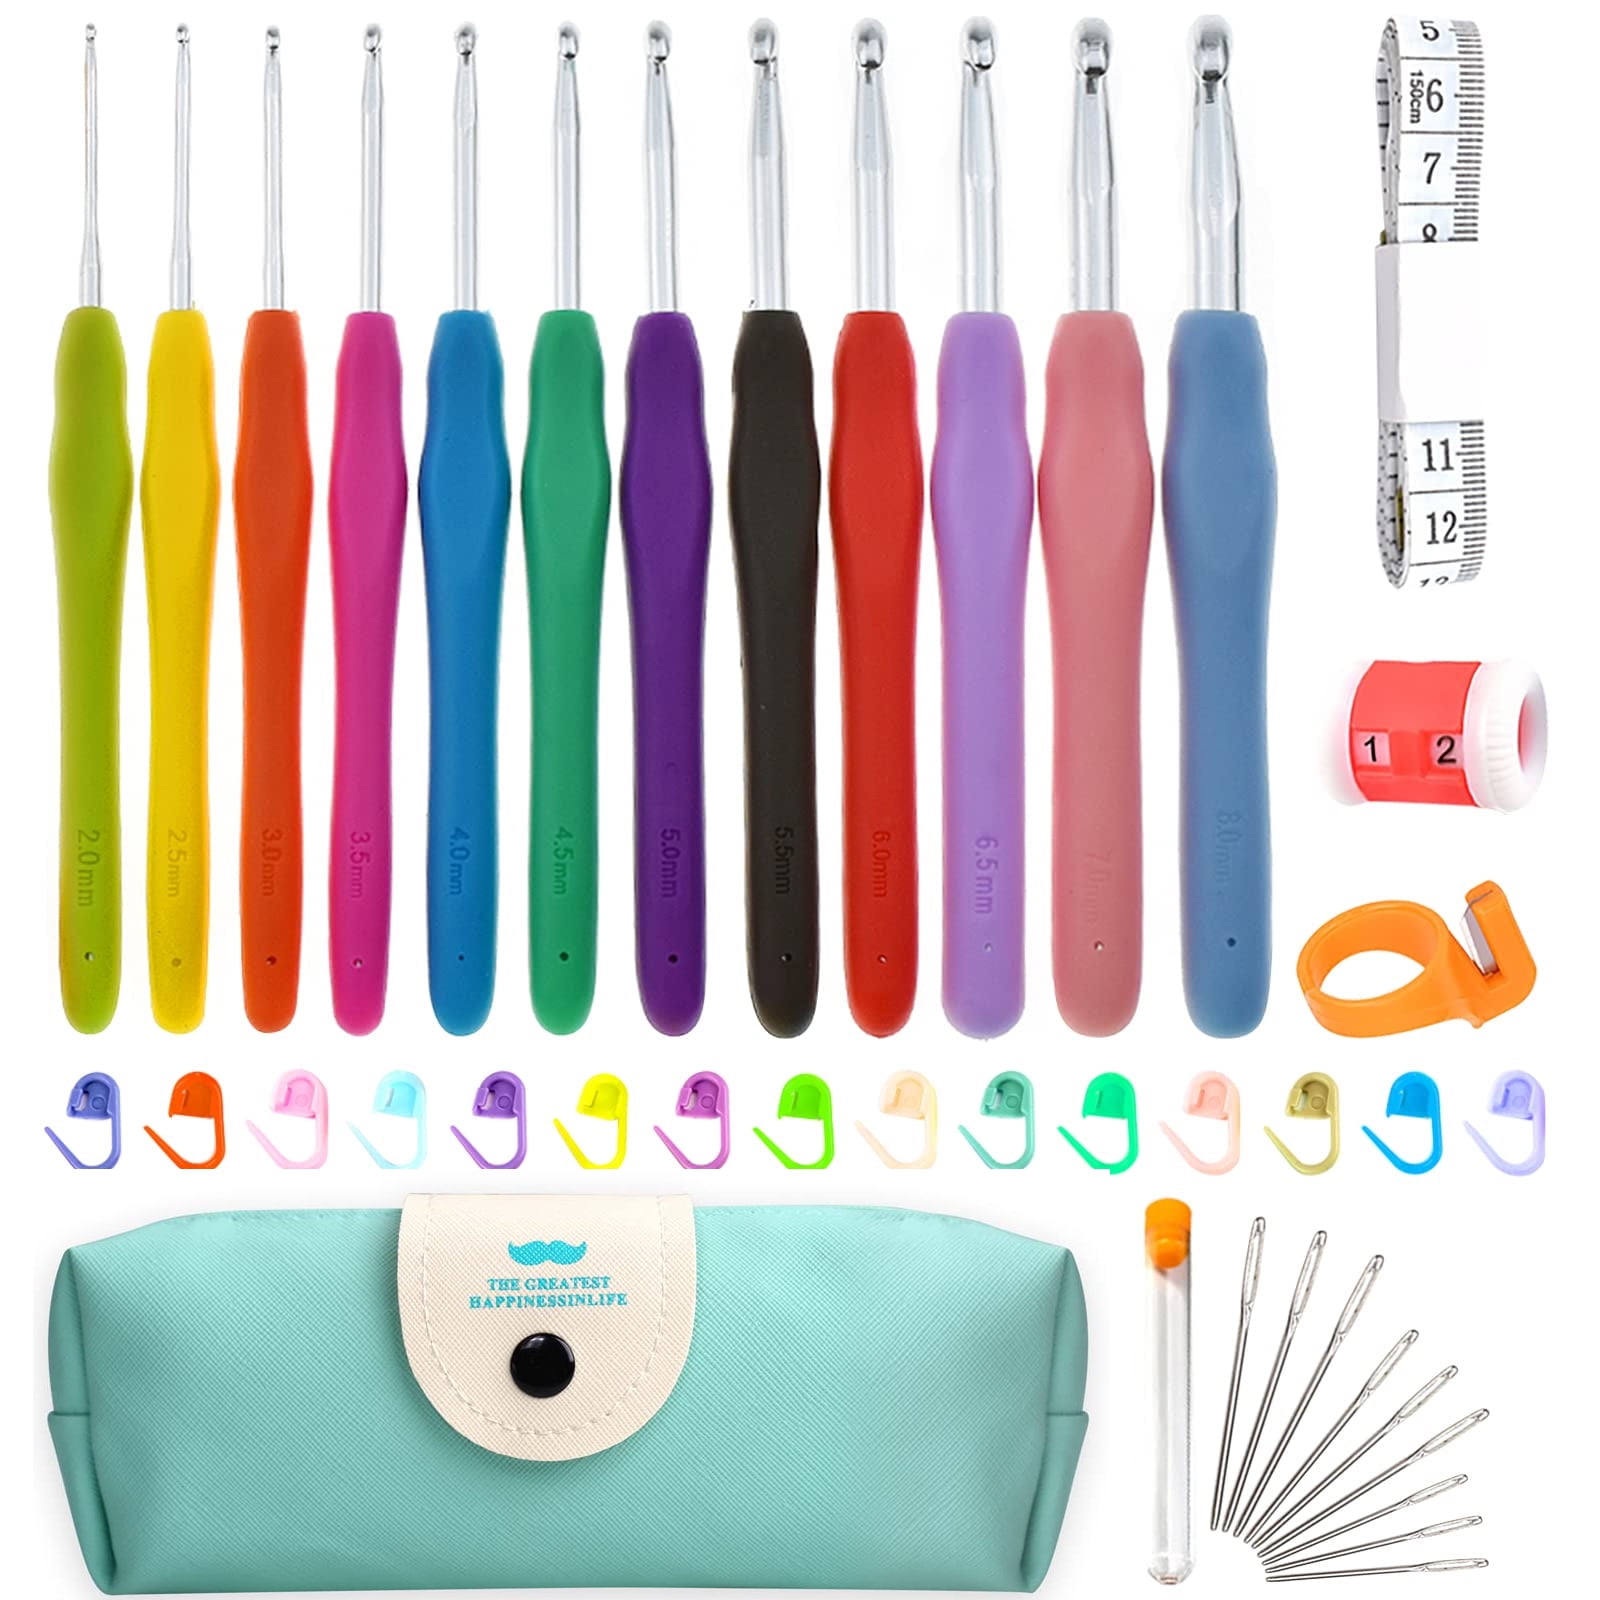 Teamoy Ergonomic Crochet Hook Set,12Pcs Large Crochet Hooks for Arthritis  and Beginners, Smooth and Comfortable